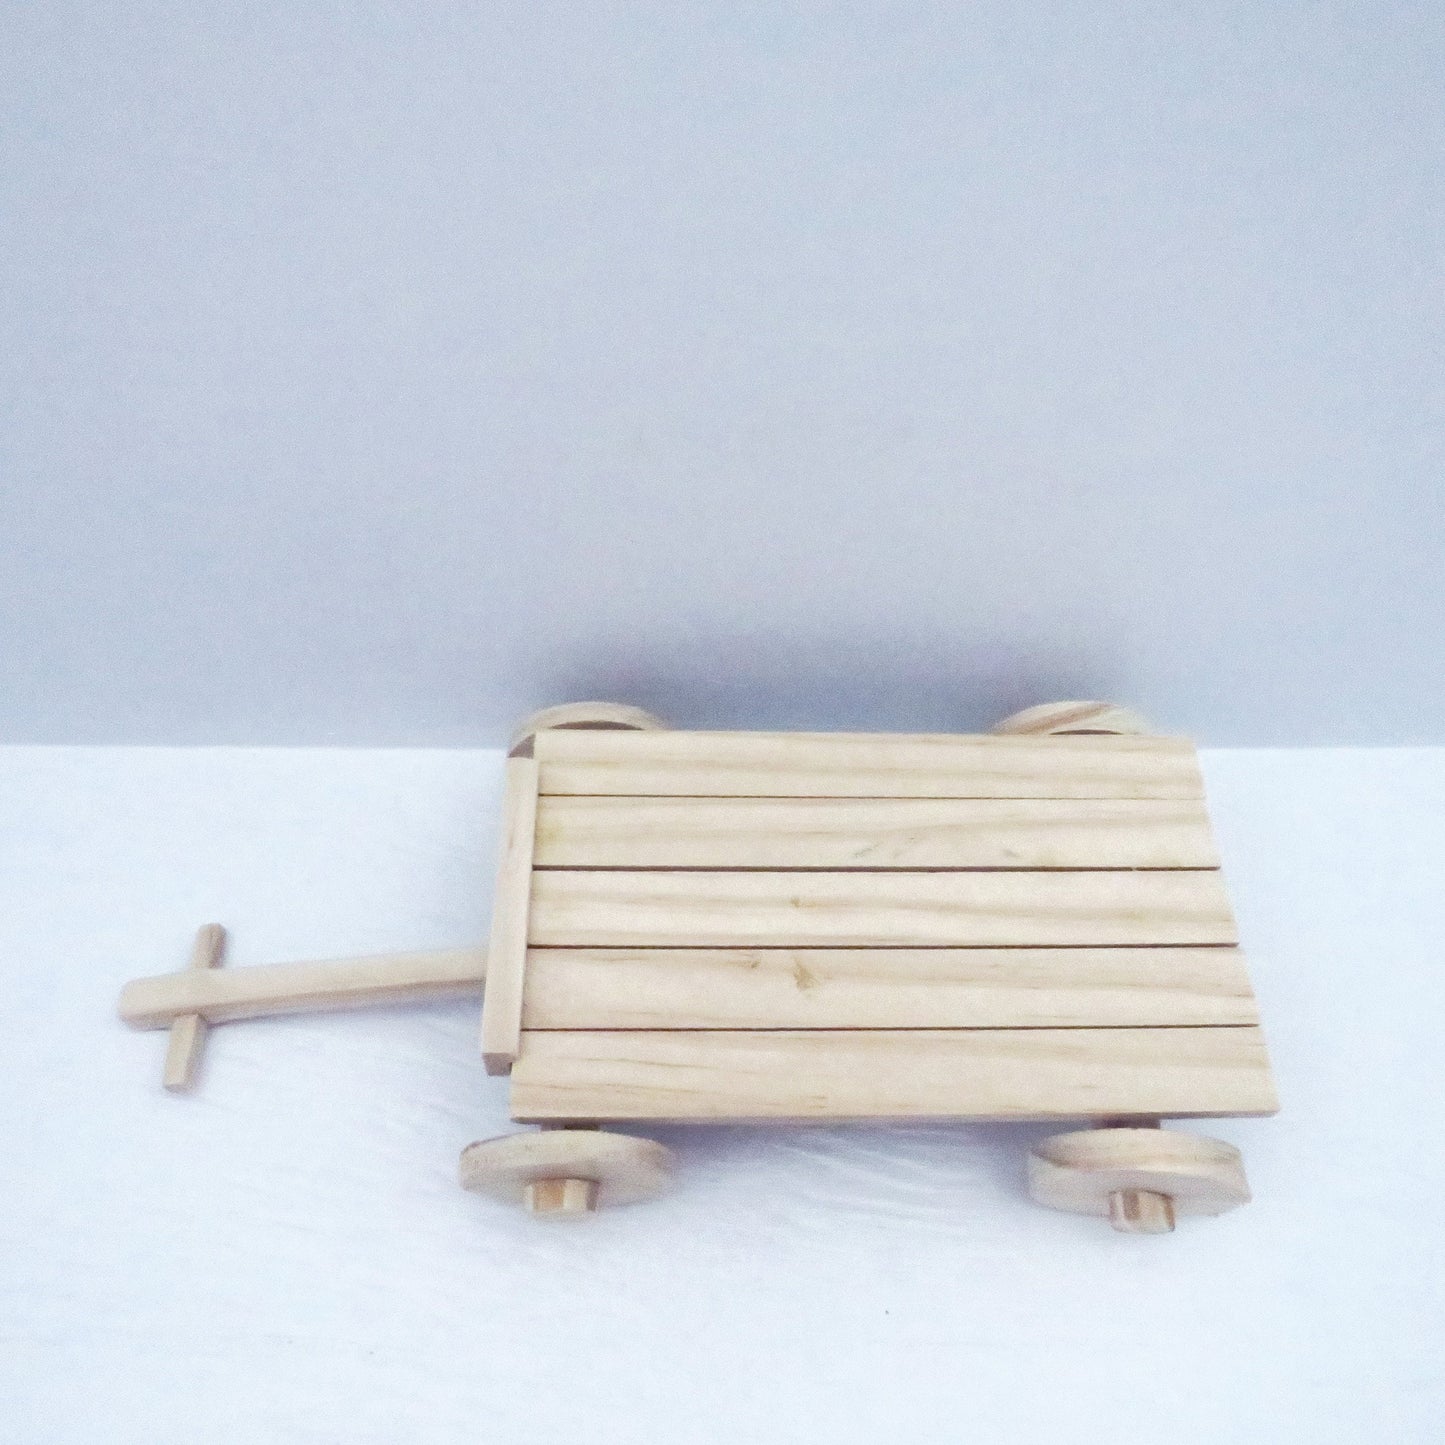 Handmade Wooden Wagon Display Bench / Upcycled Wood Bench / Ready to Paint Wood Wagon